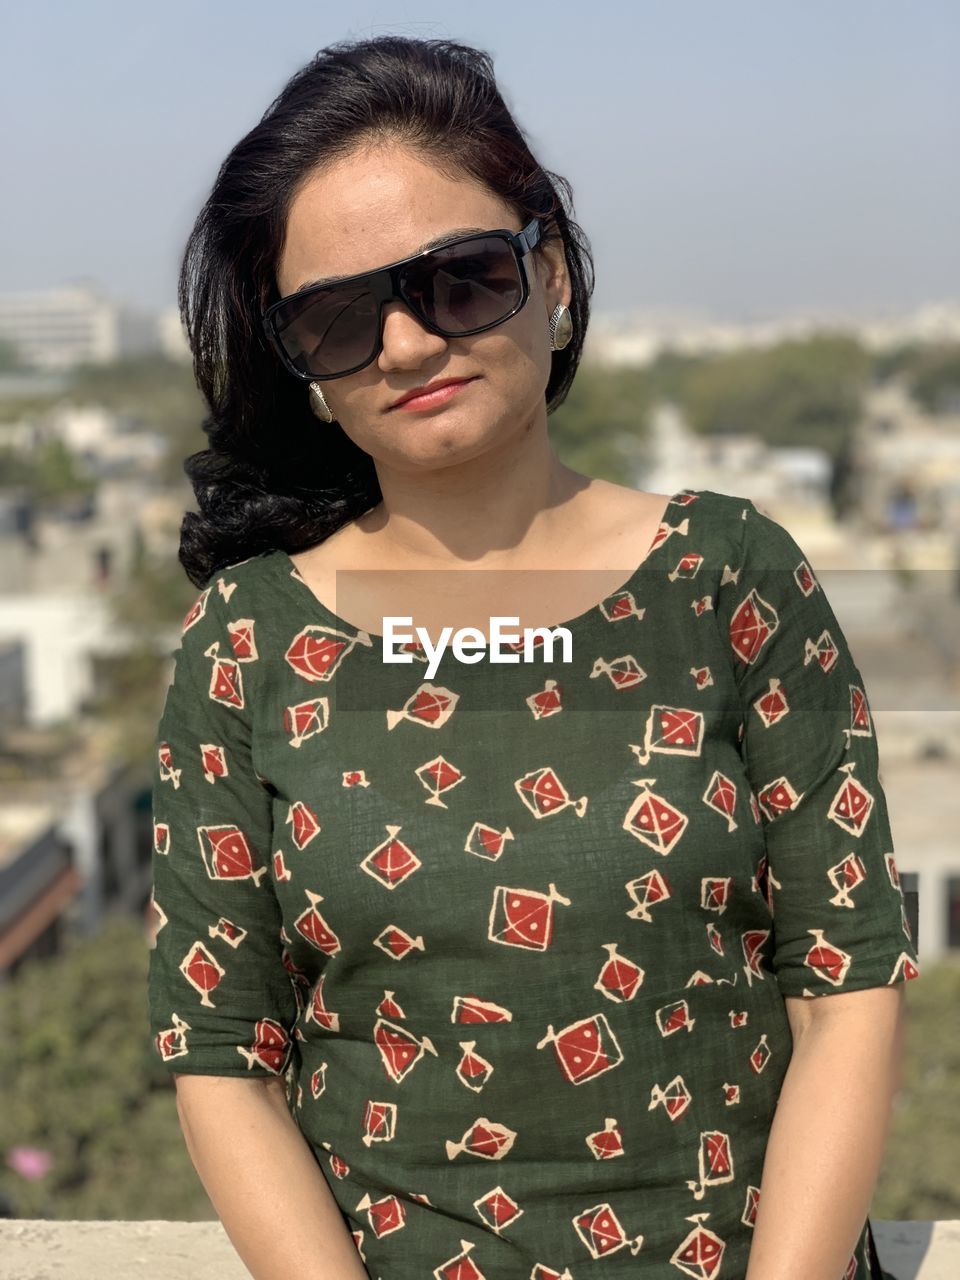 fashion, sunglasses, glasses, one person, front view, portrait, pattern, adult, spring, standing, young adult, women, waist up, photo shoot, hairstyle, dress, focus on foreground, nature, casual clothing, clothing, day, sleeve, black hair, brown hair, lifestyles, looking at camera, outdoors, architecture, cool attitude, leisure activity, person, sunlight, polka dot, sky, emotion, smiling, long hair, arts culture and entertainment, human face, city, female, three quarter length, sunny